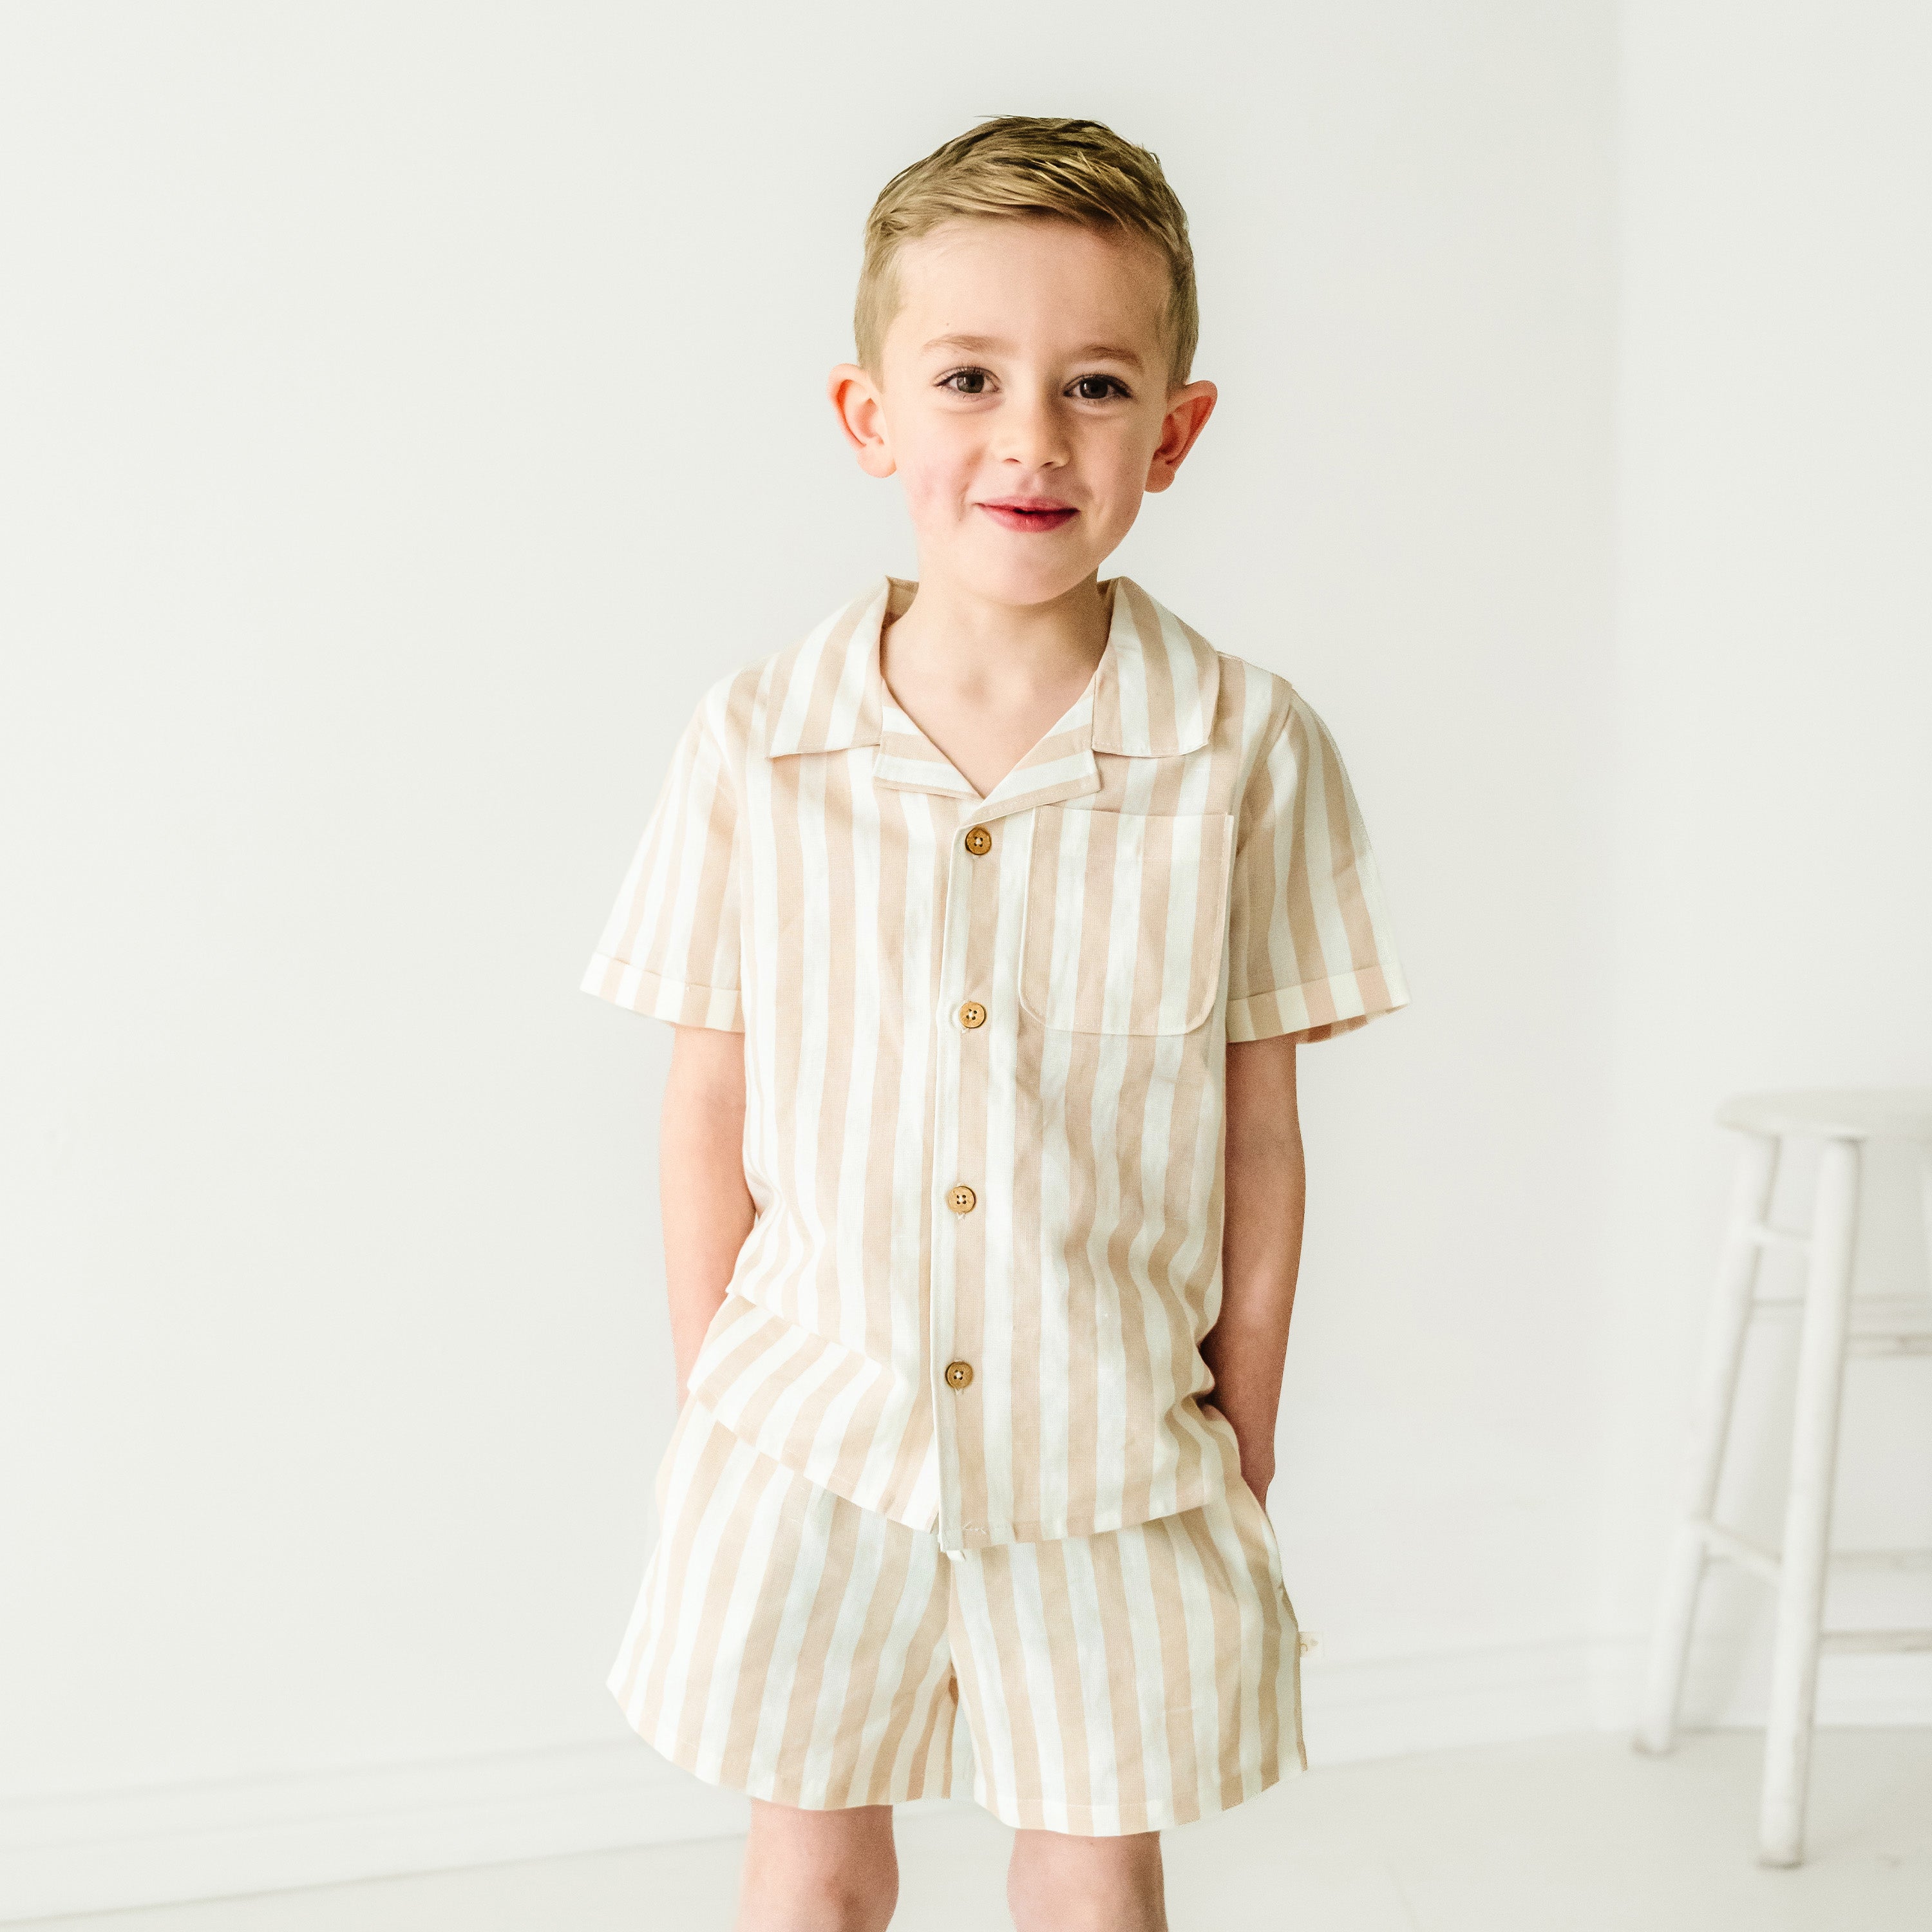 A toddler smiling at the camera, wearing a Makemake Organics Organic Linen Shirt and Shorts Set in Beige Stripes, standing in a bright white studio setting.